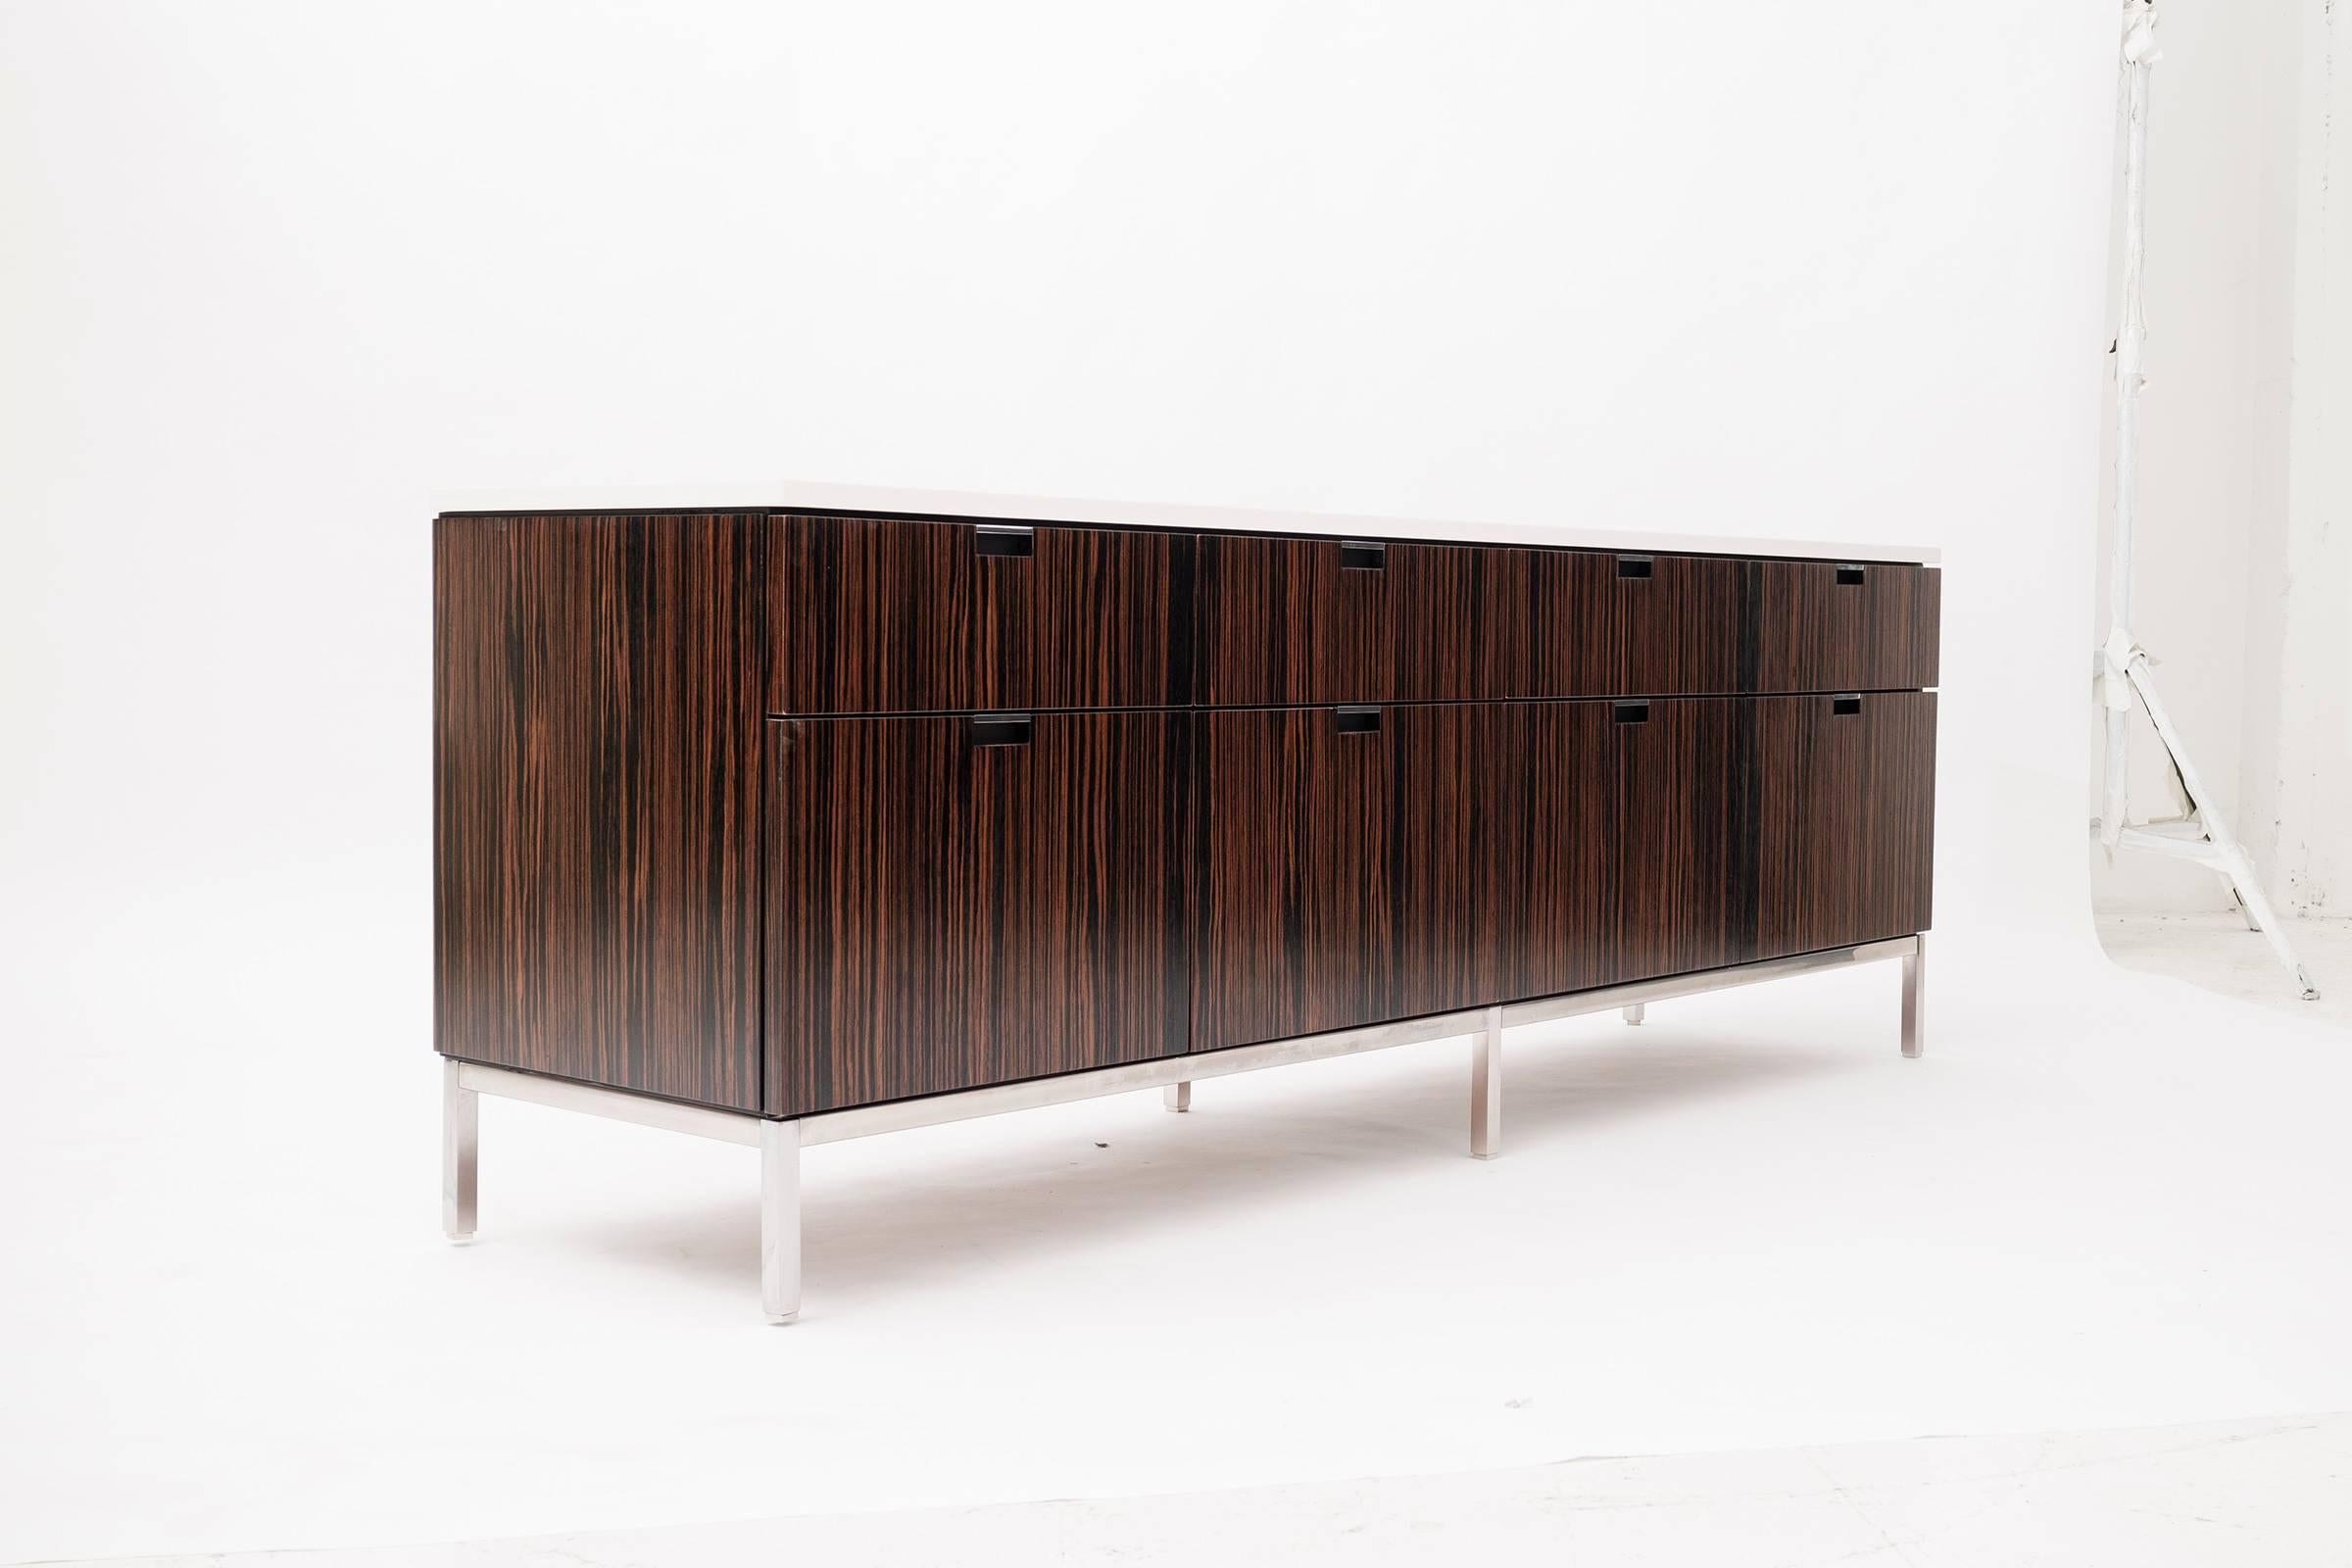 Florence Knoll for Knoll International. This special ordered book-matched ebony stripped veneer credenza features eight drawers with a marble top and chrome-plated base with adjustable feet.

This item is currently on view in our NYC Greenwich